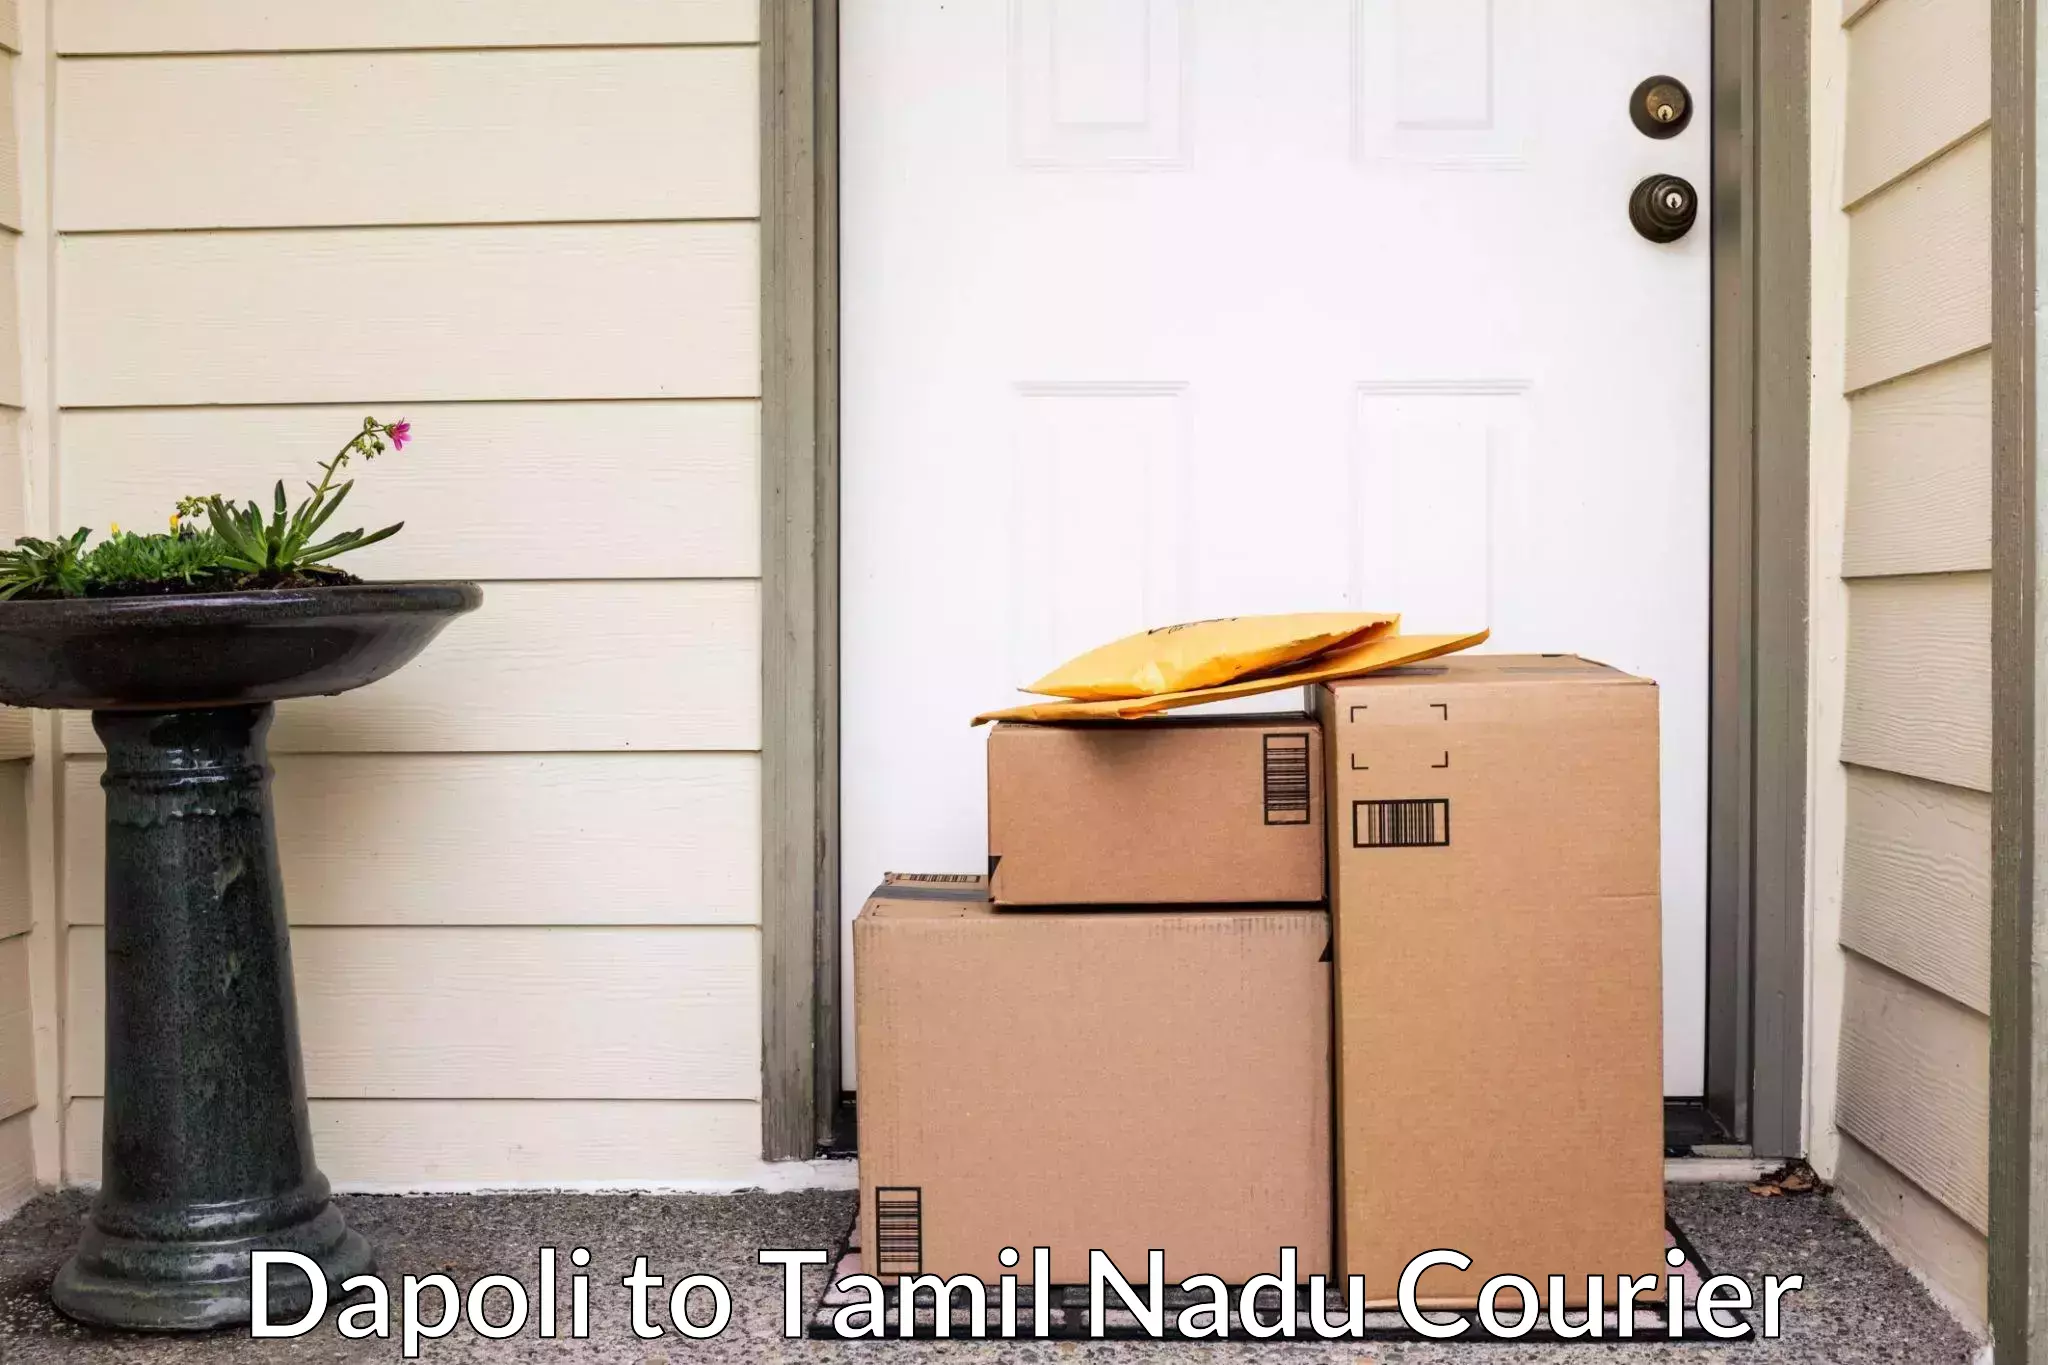 Quality relocation services Dapoli to Nagercoil